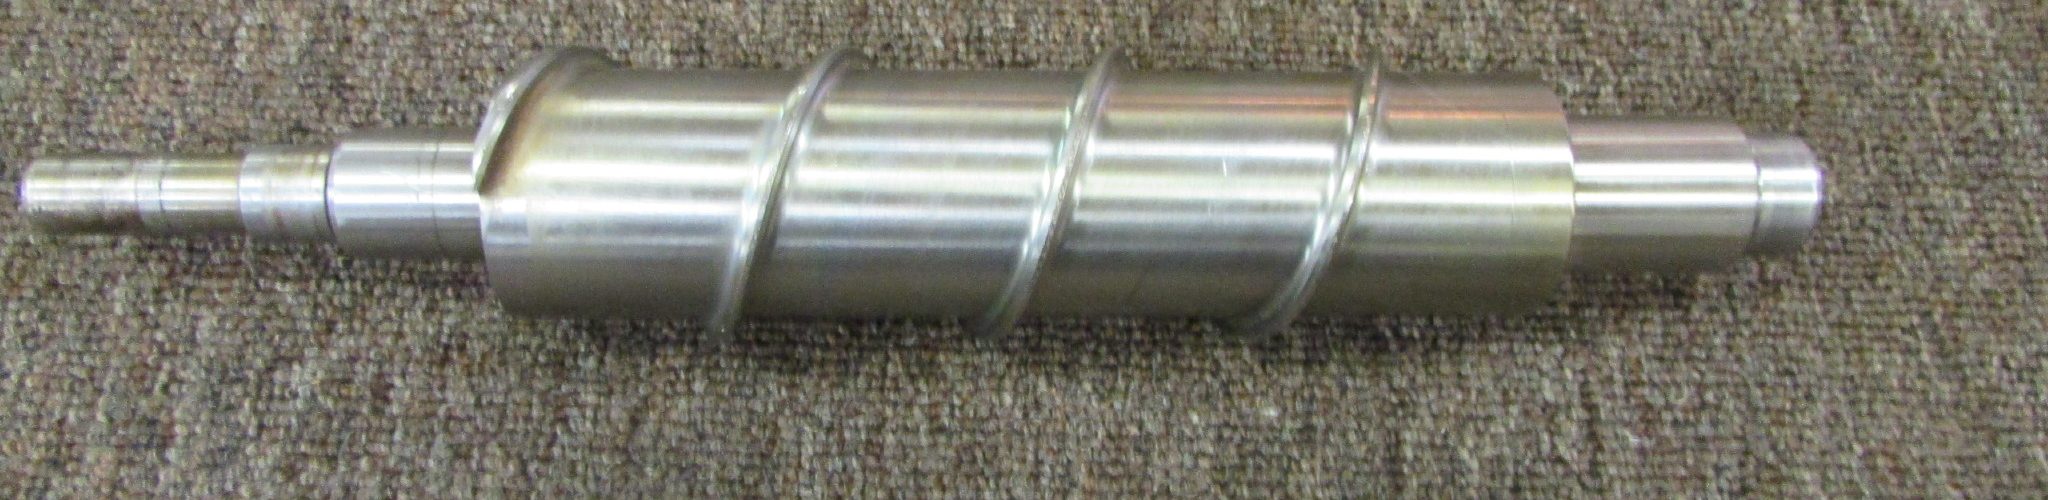 Replacement Shaft with Raised Grooves